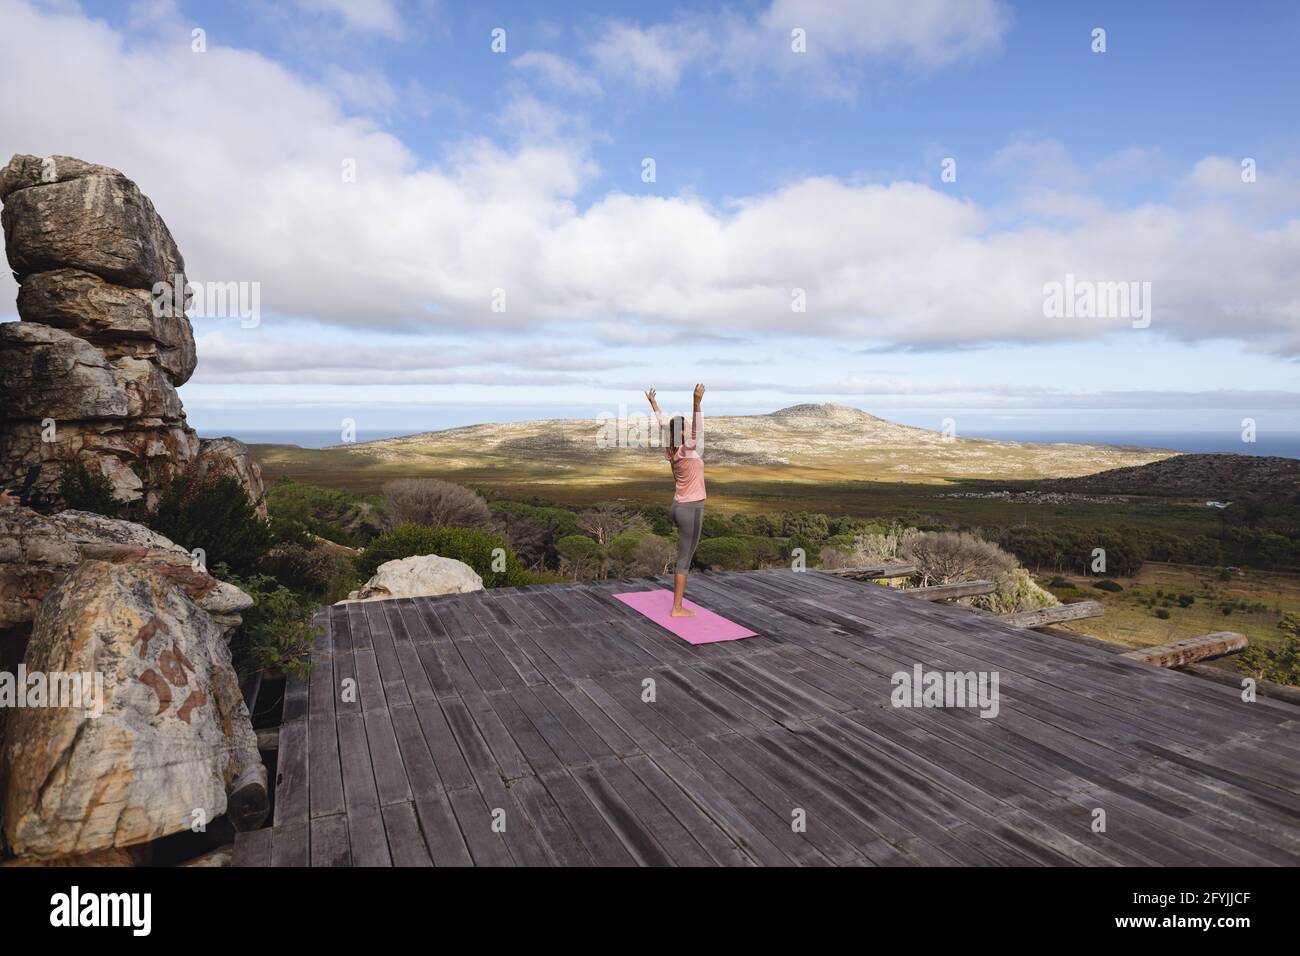 Caucasian woman practicing yoga standing on one leg stretching in rural mountain setting Stock Photo